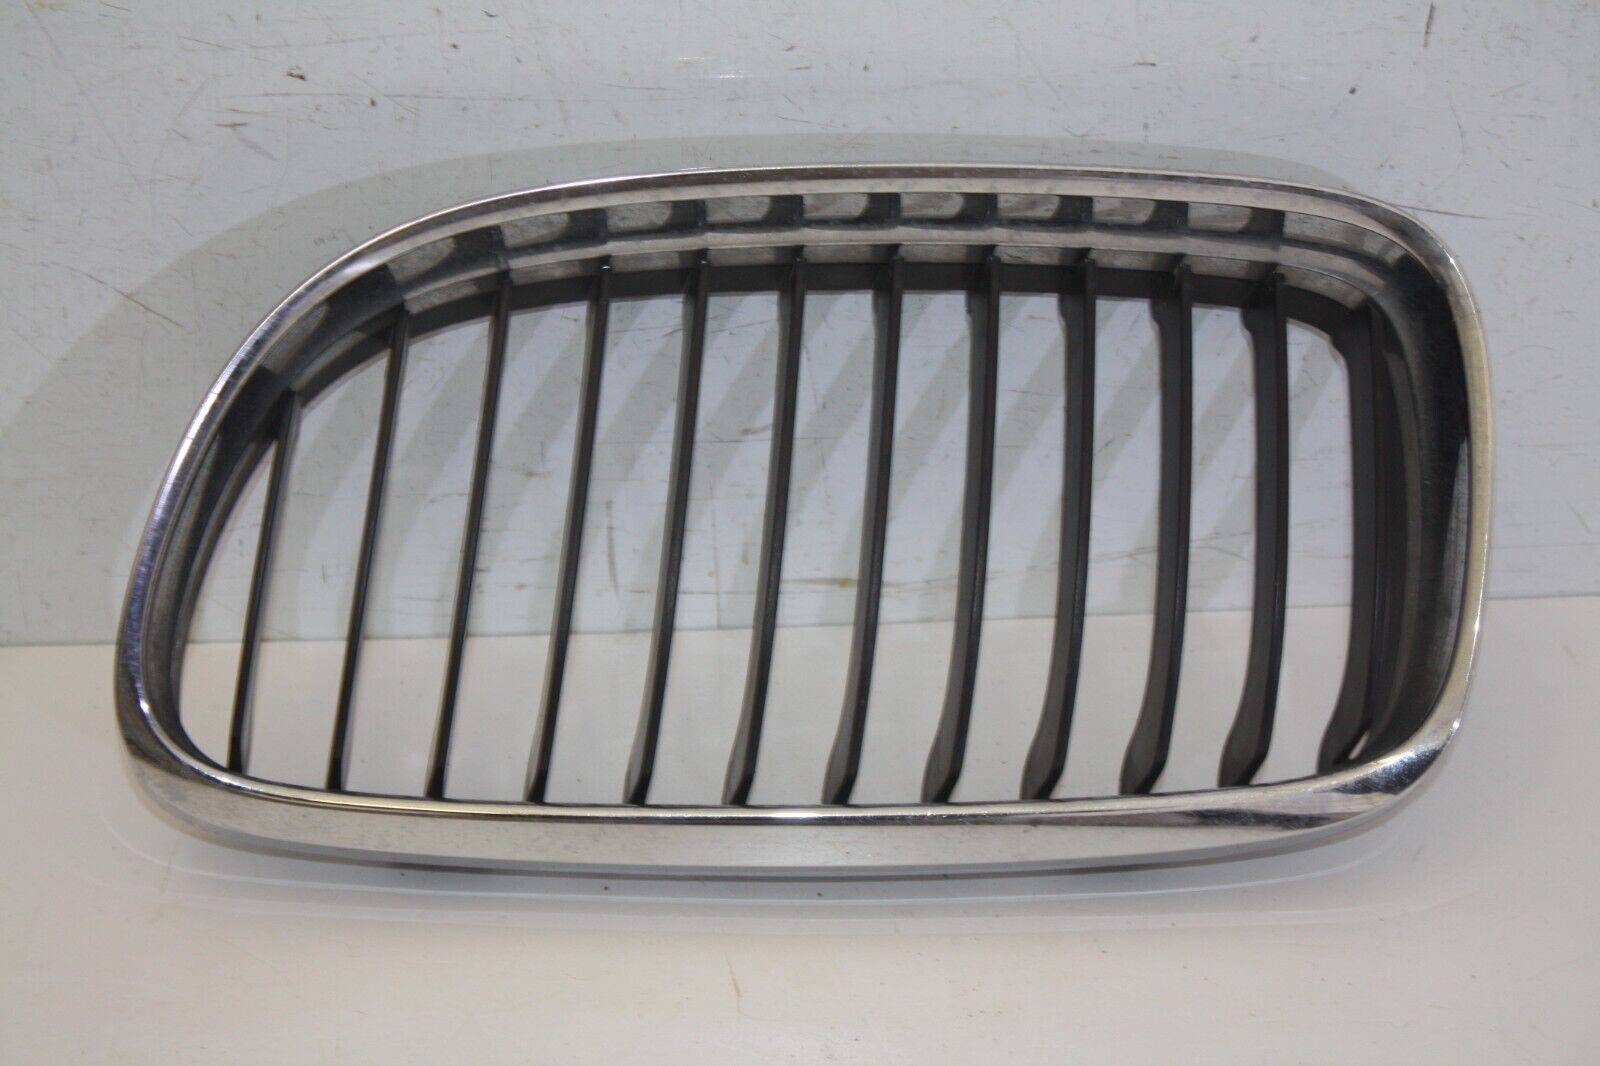 BMW-3-Series-E90-LCI-Front-Bumper-Left-Kidney-Grill-2008-TO-2012-51137201967-176234542894